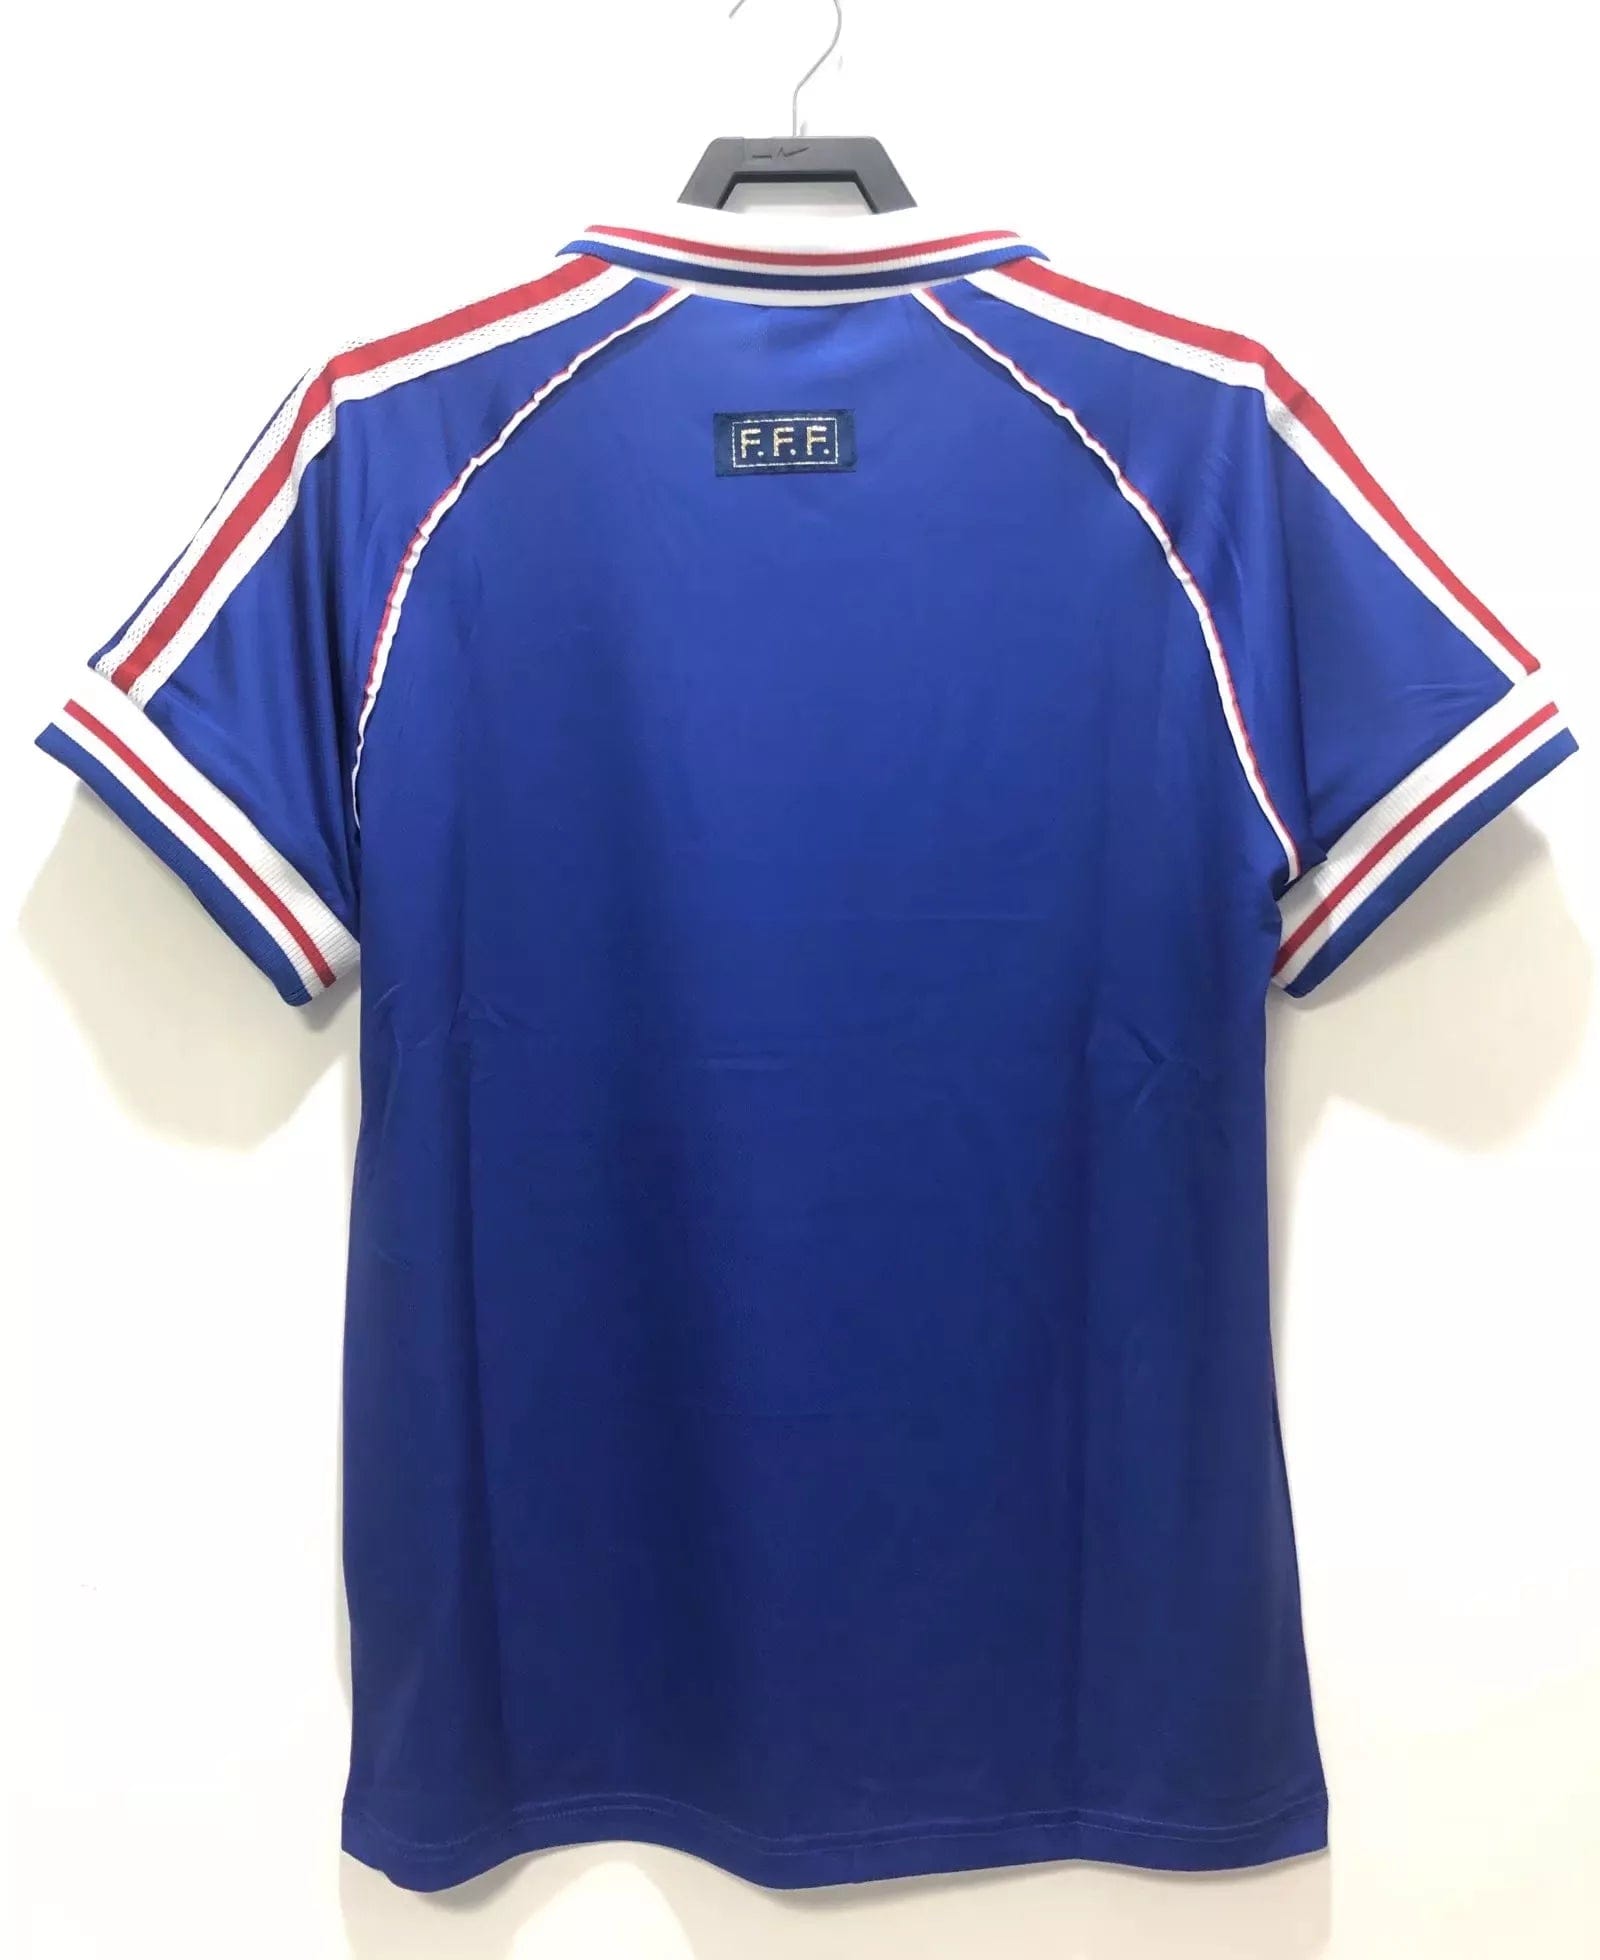 Retro France World Cup 1998 Home Jersey - Classic Home Kit